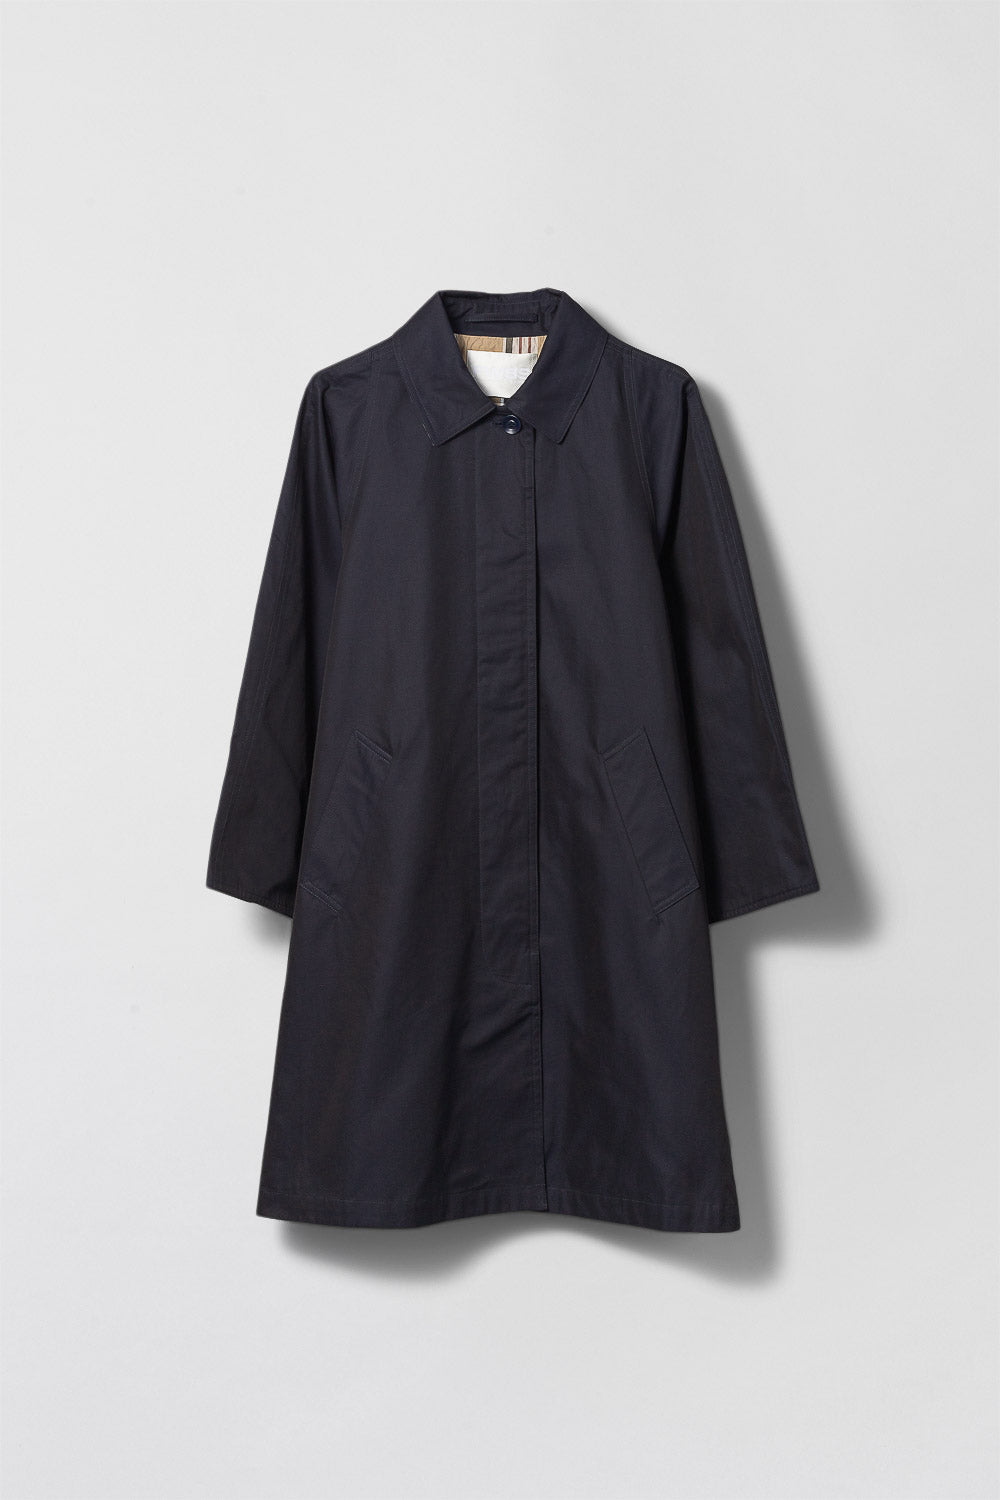 Anchorage Trench Coat Navy Blue